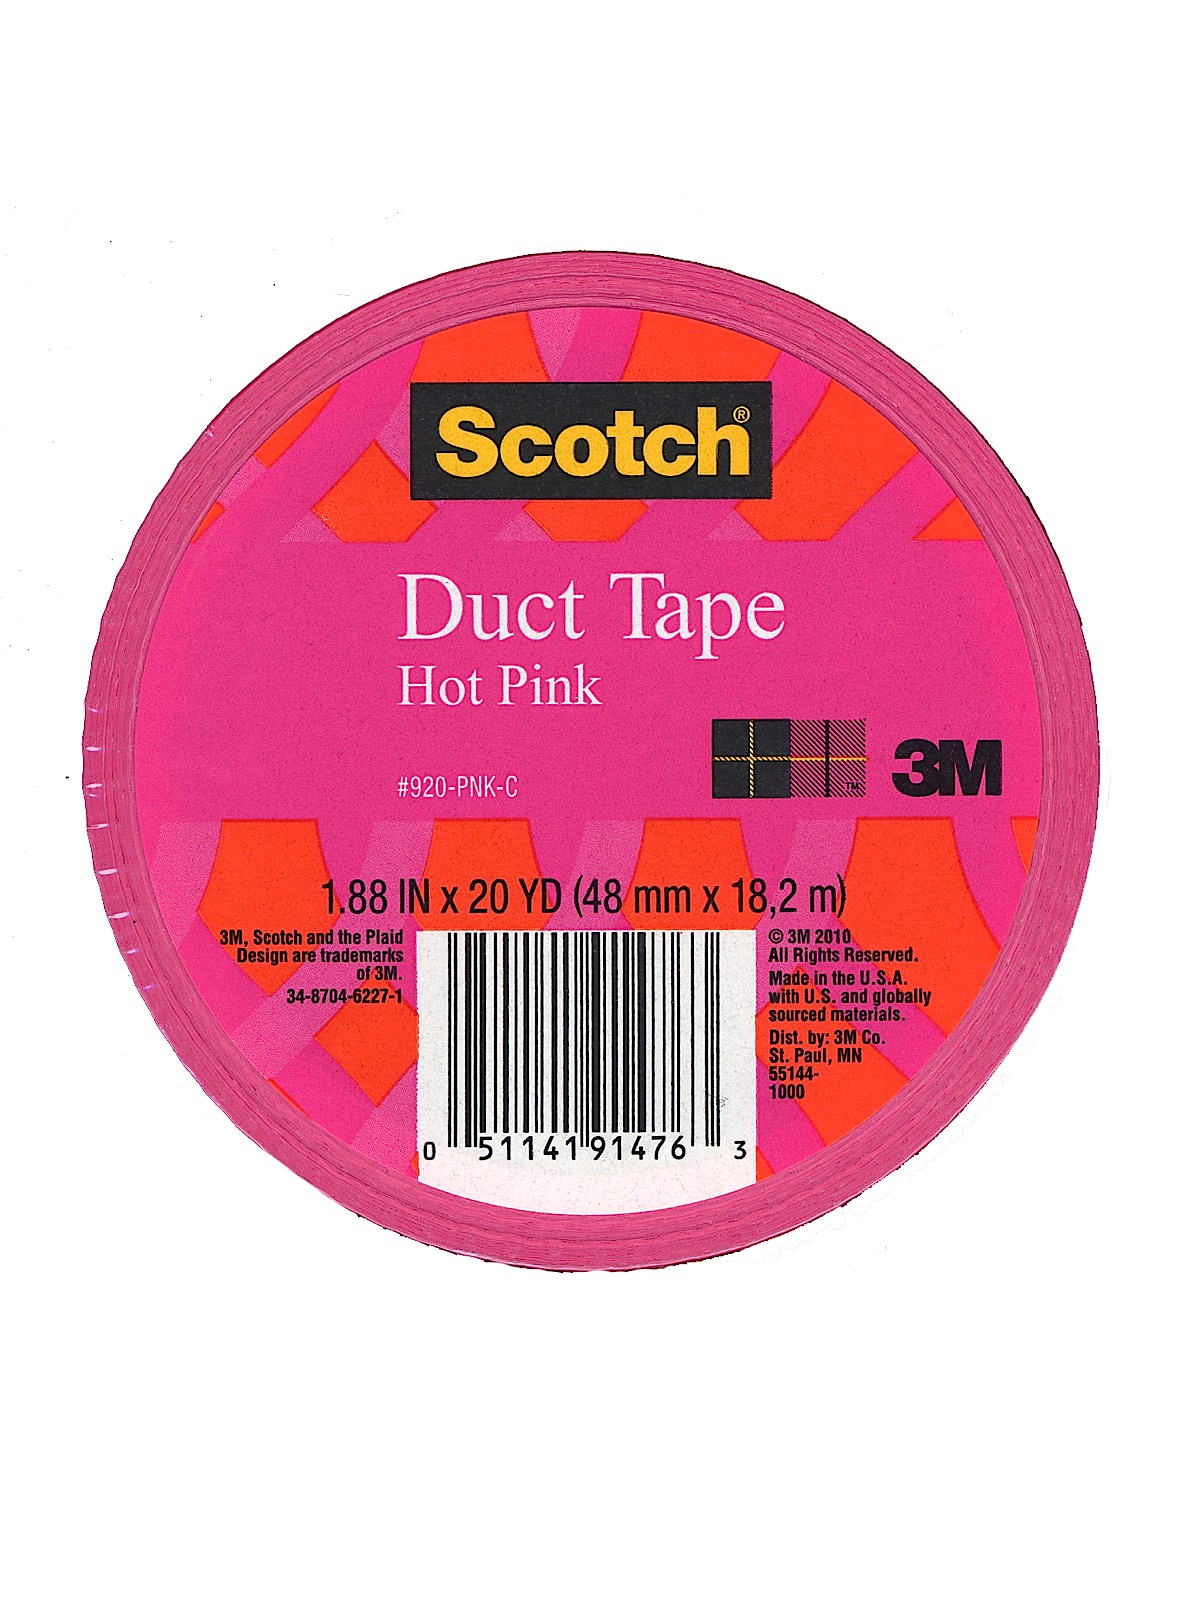 Colored Duct Tape Hot Pink 1.88 In. X 20 Yd. Roll 920-PNK-C